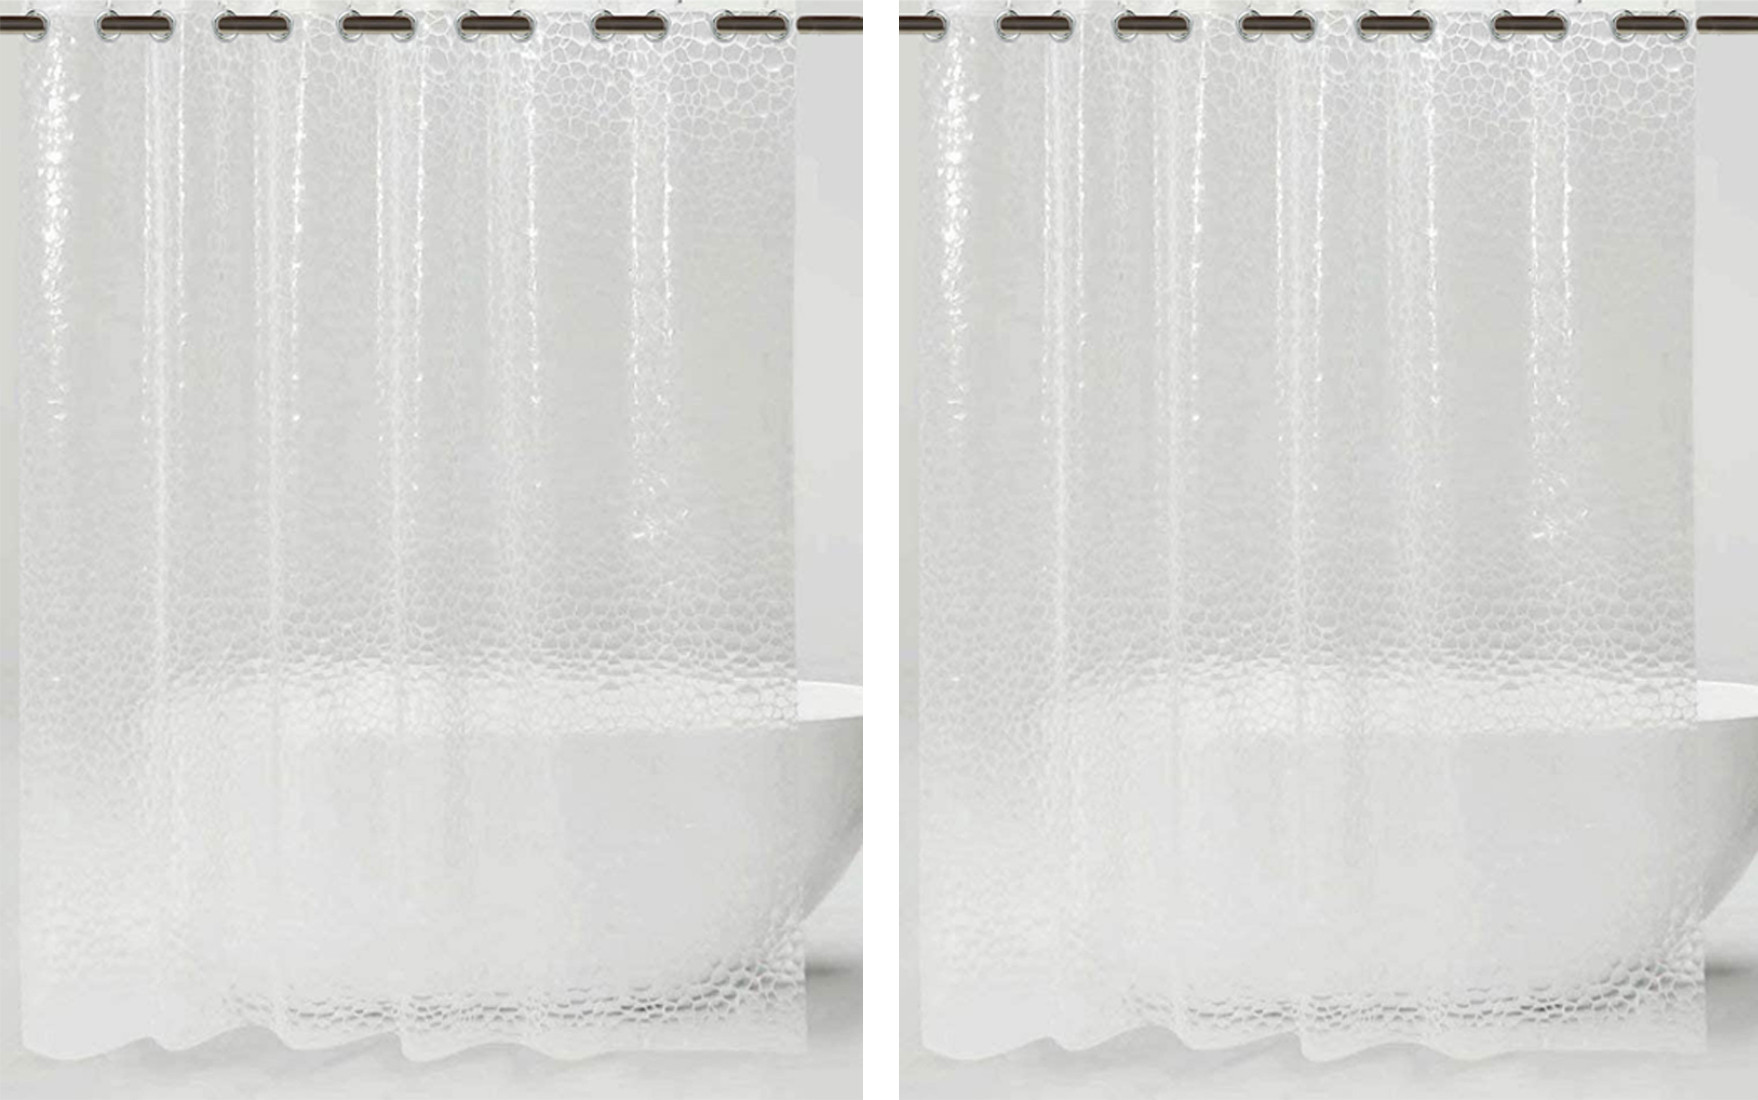 Kuber Industries 0.20mm 3D Stain Resistant, No Odor Clear Waterproof PVC AC Shower Curtain With Eyelets,7 Feet (Transparent)-HS_38_KUBMART21301